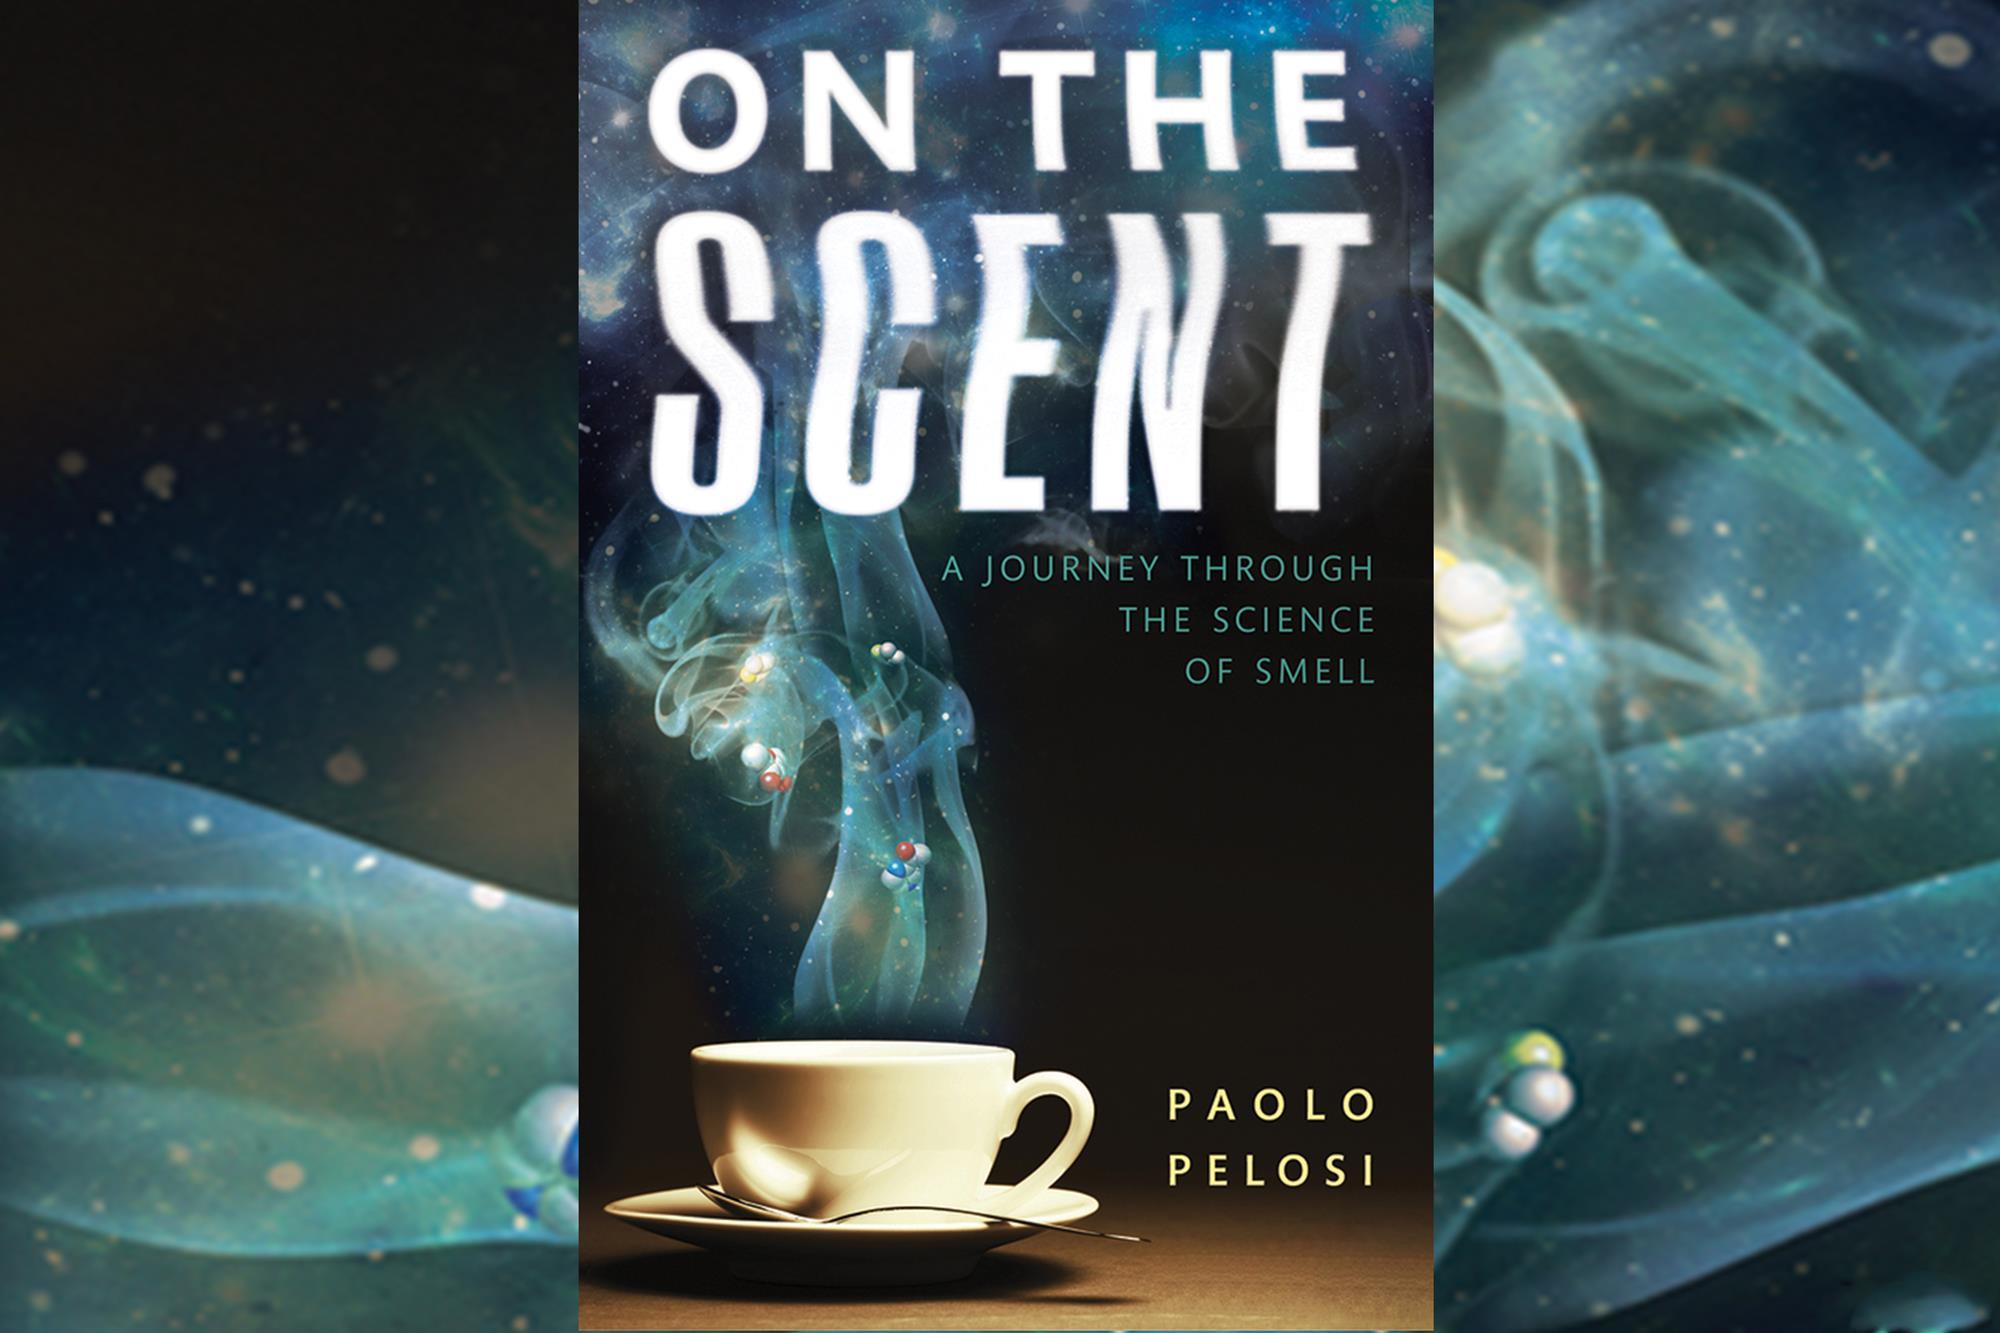 On the scent: a journey through the science of smell, Review